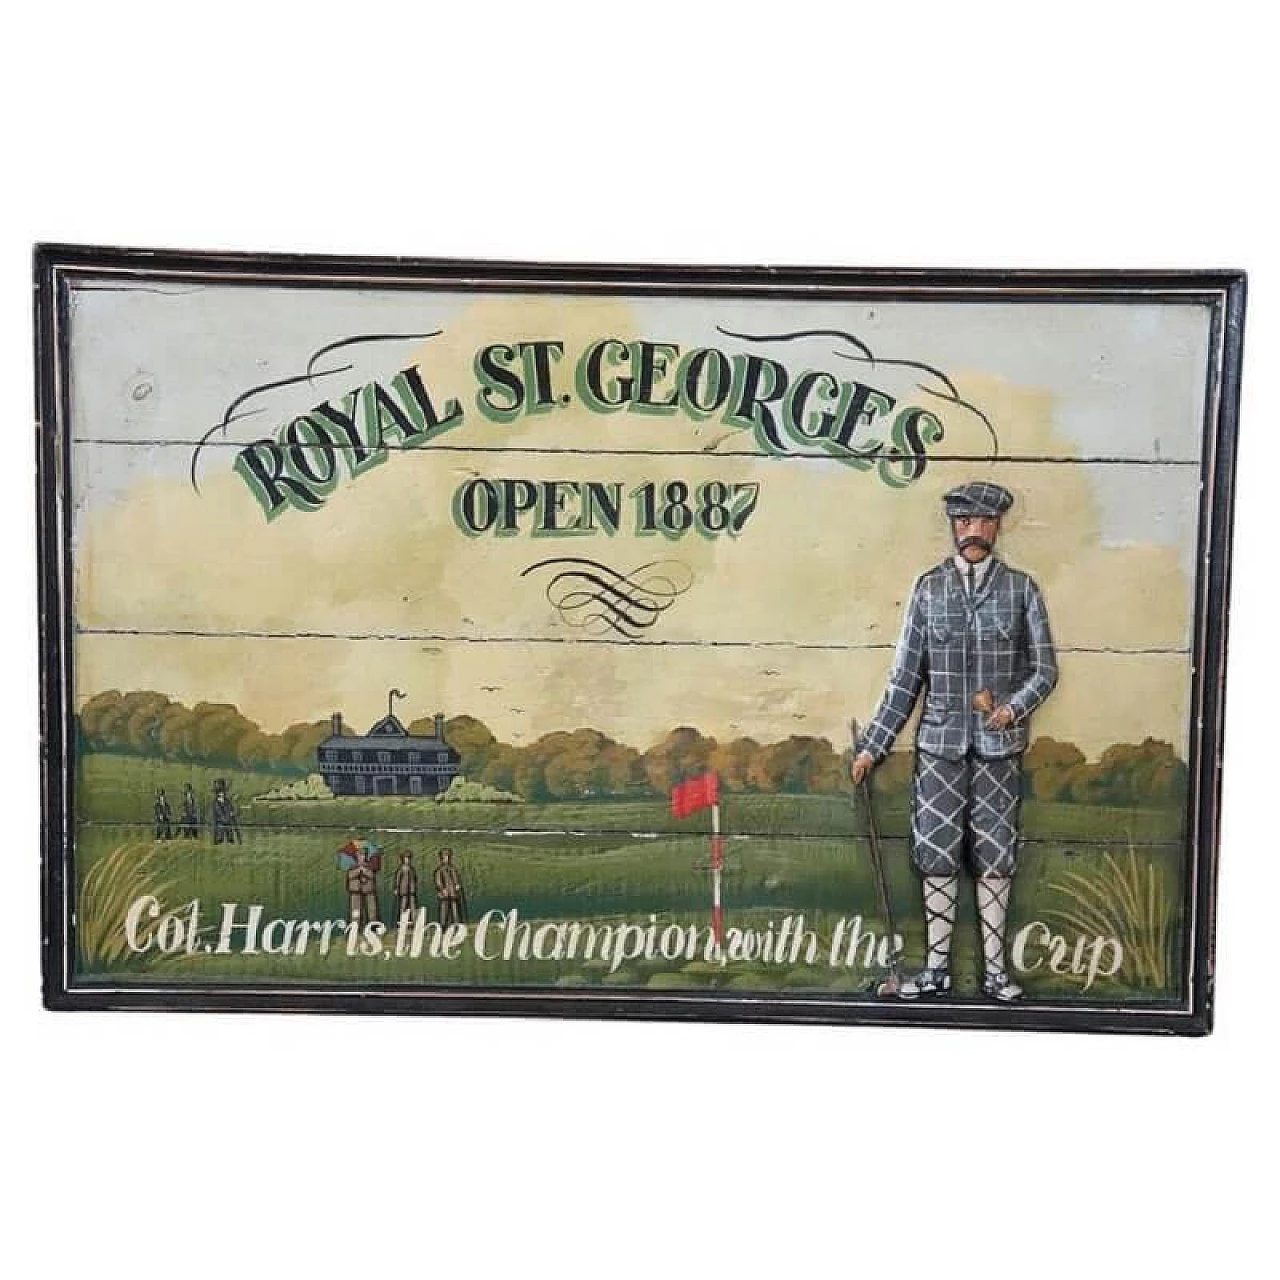 Hand-painted sign with relief decoration on wood for the Royal St. George's Golf Club , 1920s 1